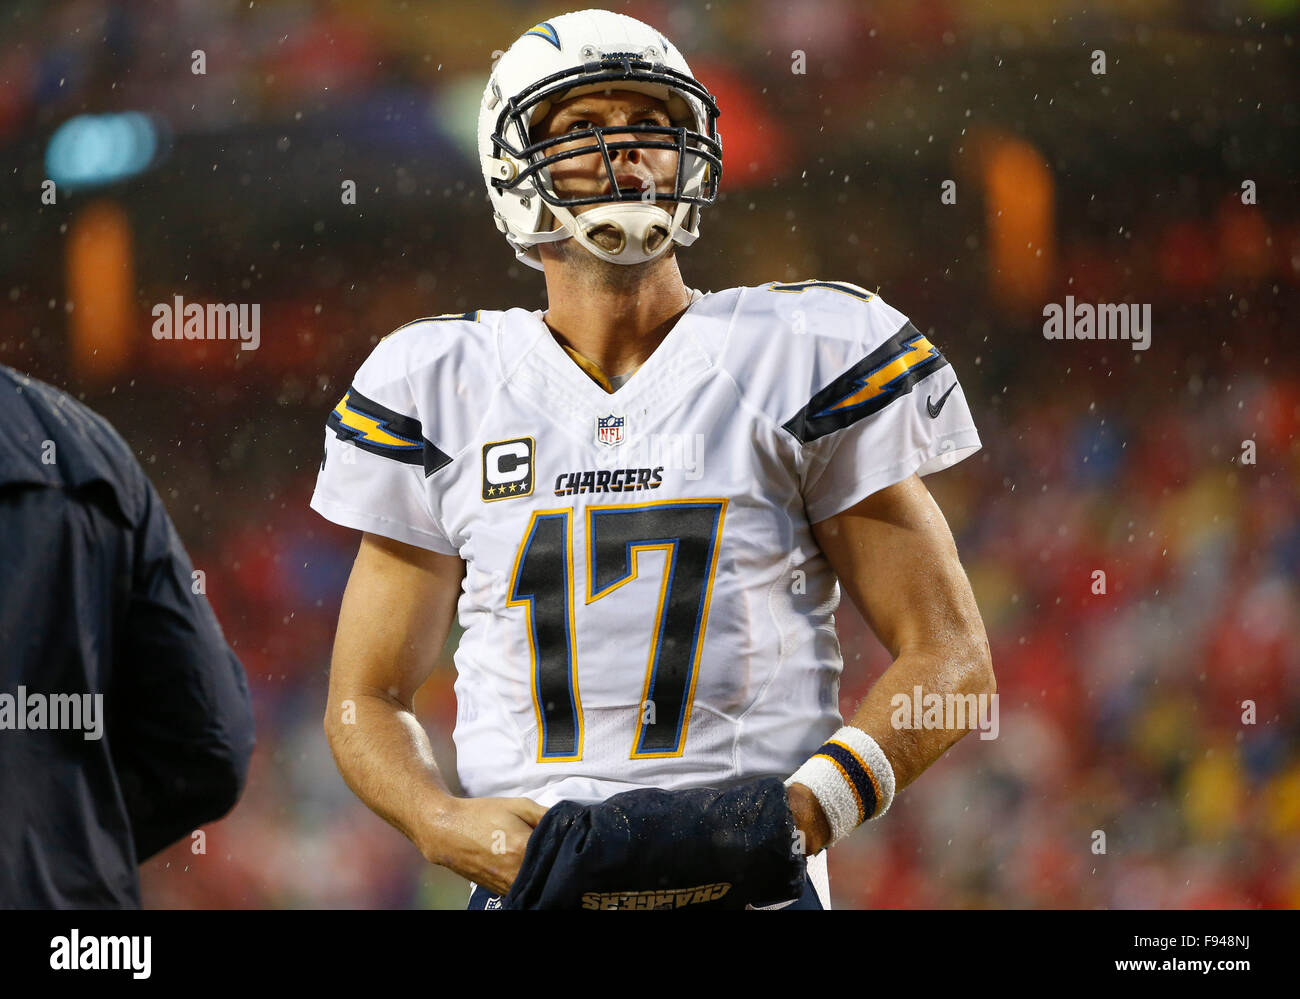 December 13, 2015: San Diego Chargers quarterback Philip Rivers (17) during the NFL game between the San Diego Chargers and the Kansas City Chiefs at Arrowhead Stadium in Kansas City, MO Tim Warner/CSM. Stock Photo